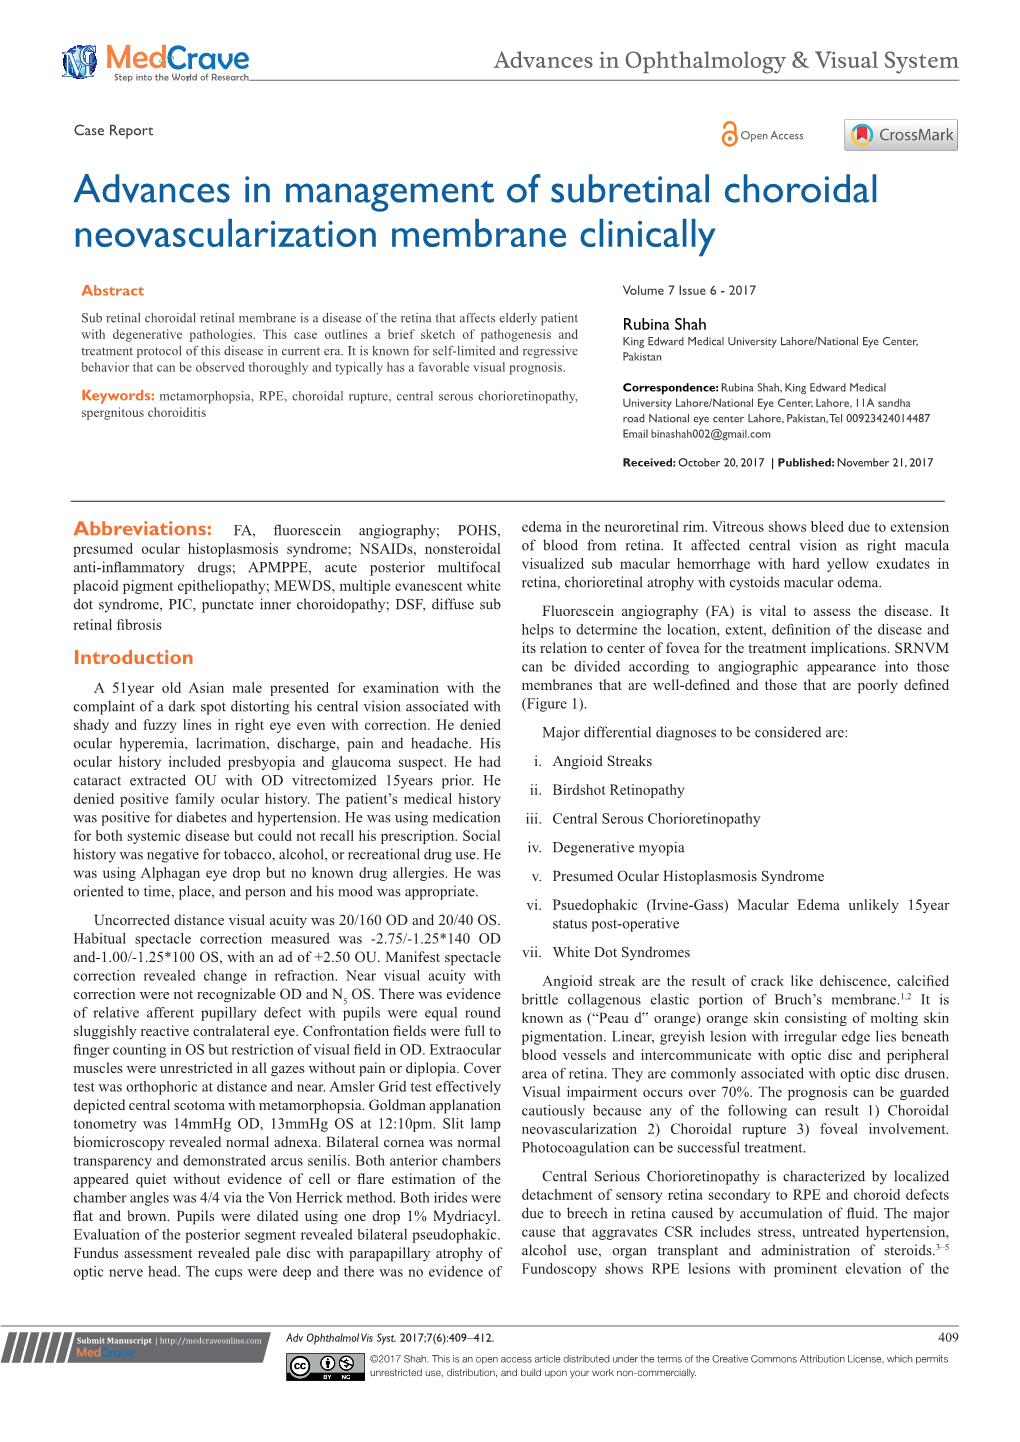 Advances in Management of Subretinal Choroidal Neovascularization Membrane Clinically